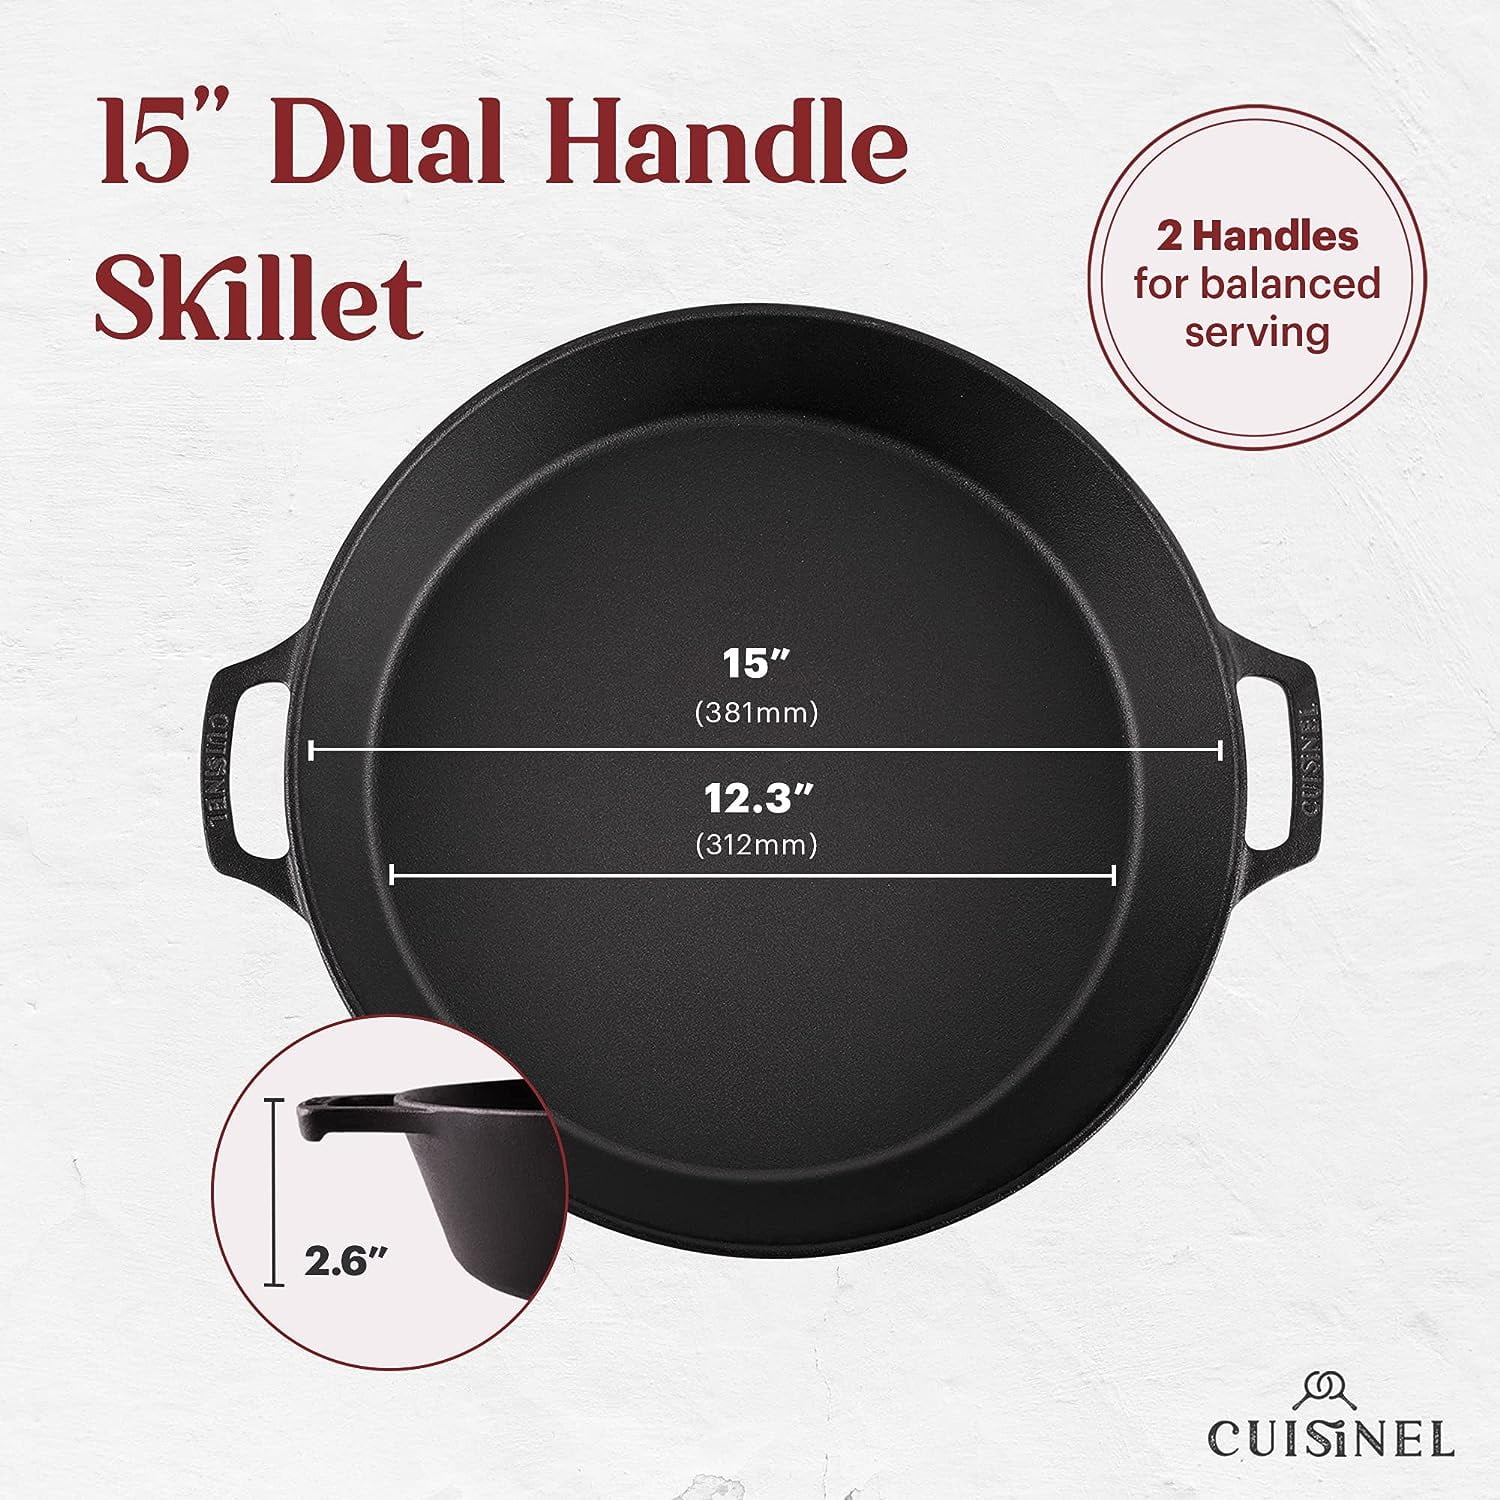 Cuisinel Cast Iron Lid - Fits 10-Inch Lodge Skillet Frying Pans or Braiser  + Silicone Handle Holder + Care Guide - 25.4-cm Pre-Seasoned Universal